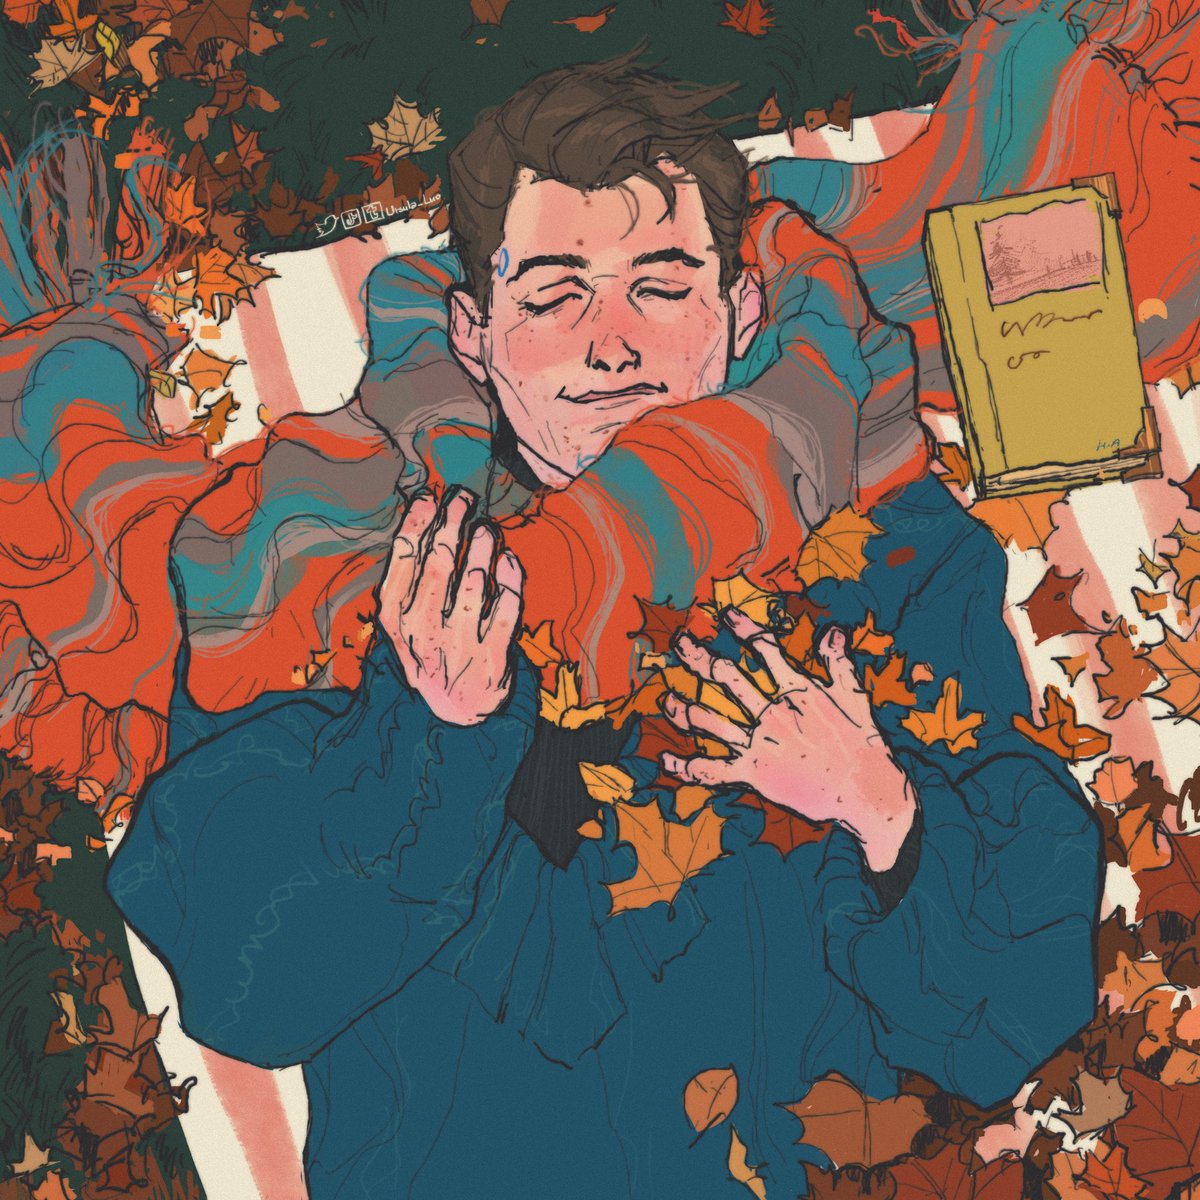 Lil android and the fall times 
#DetroitBecomeHuman #connorDBH #RK800 #DBHConnor